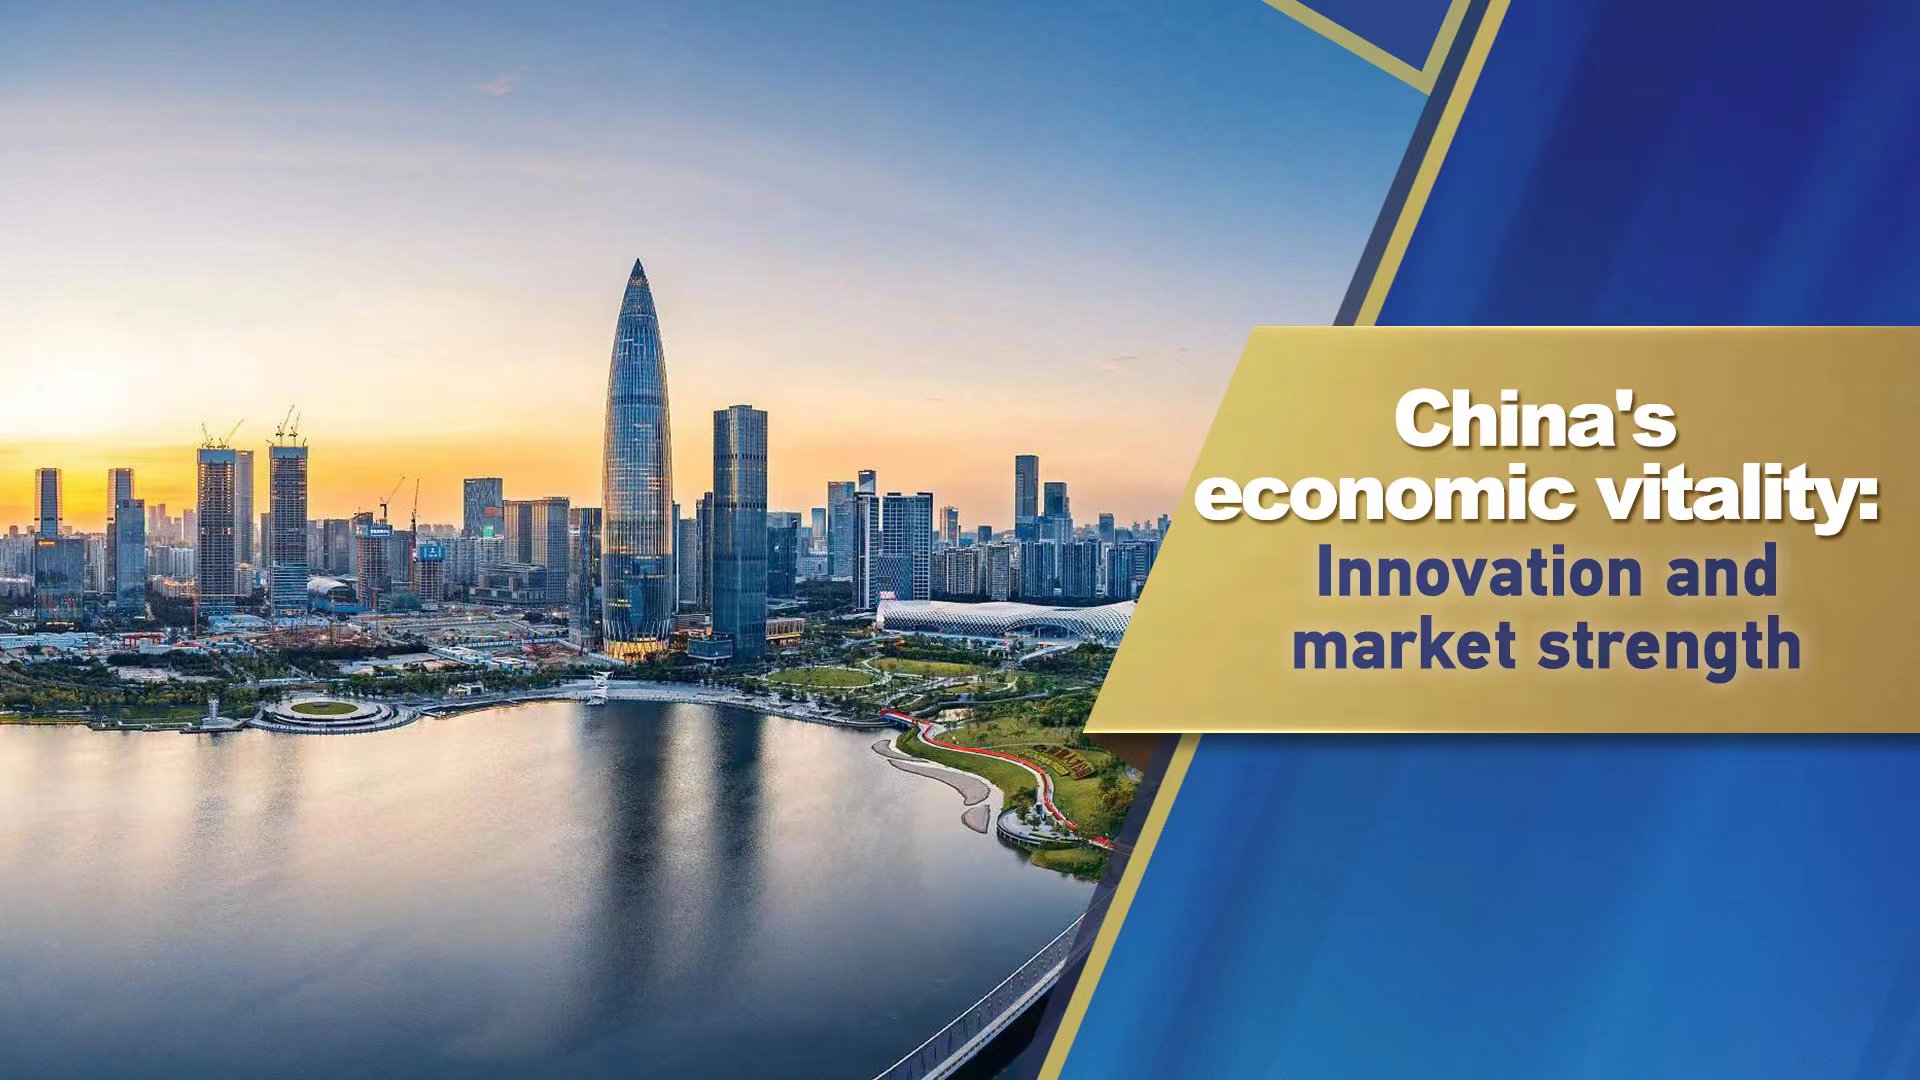 China's economy shows vitality with innovative growth, booming market